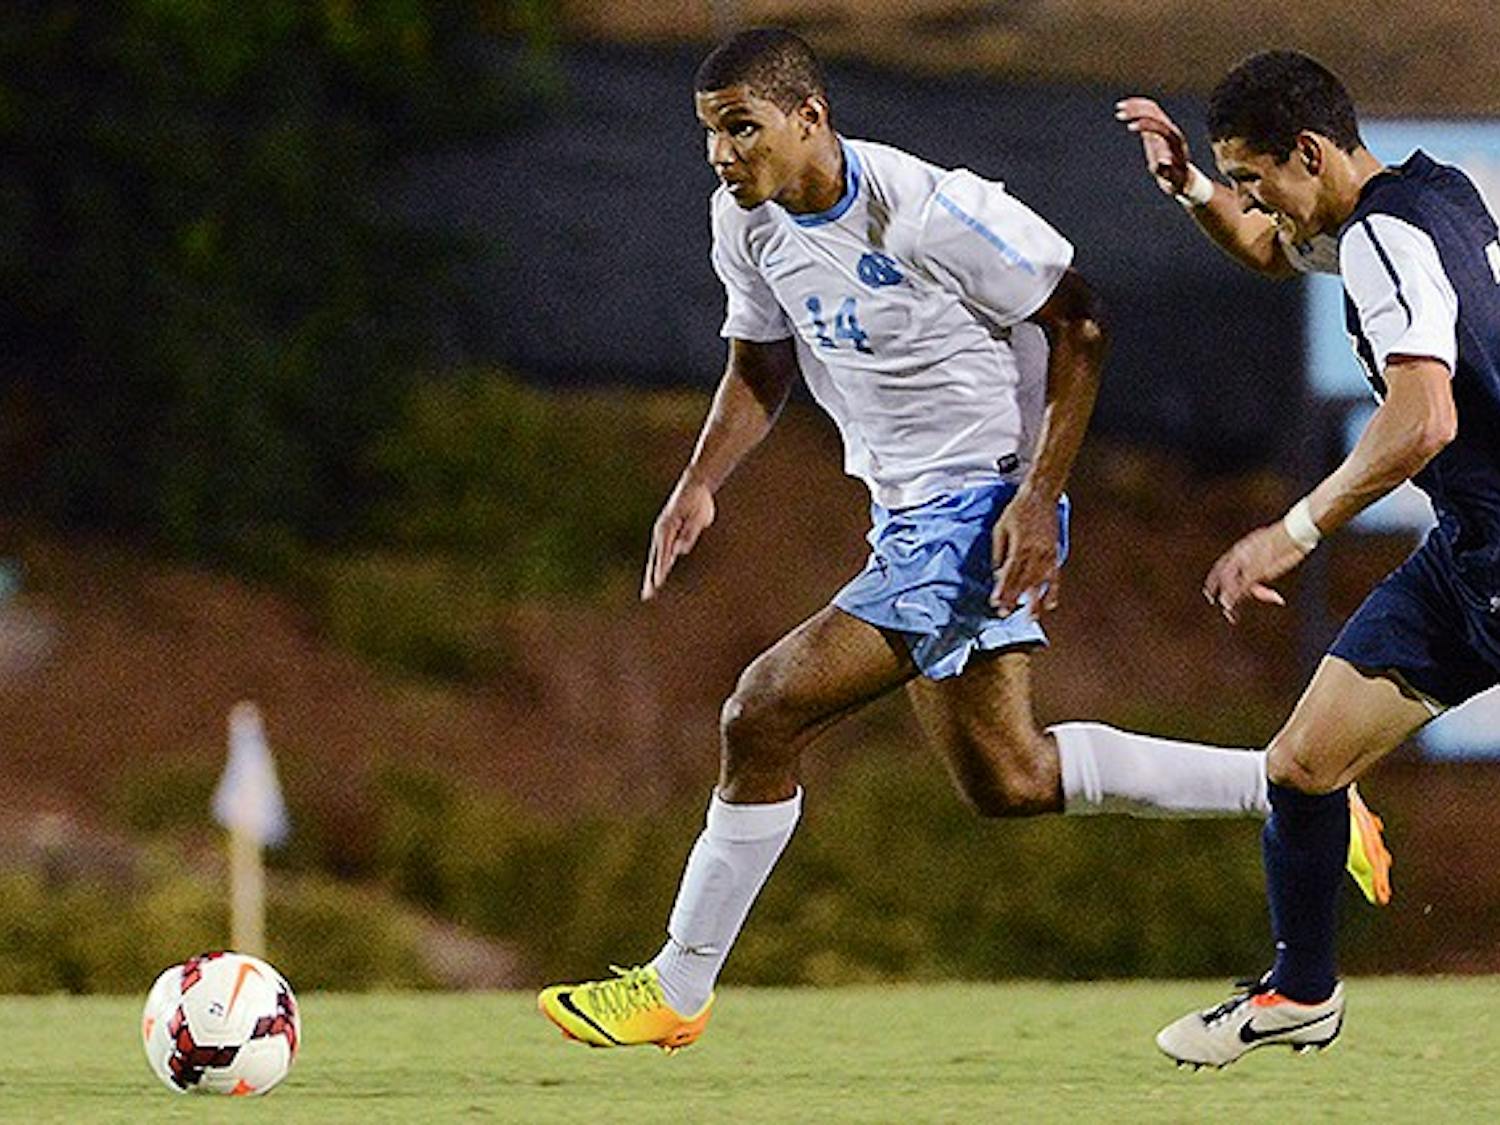 UNC midfielder Omar Holness (14) dribbles the ball up field as a Monmouth defender applies pressure.